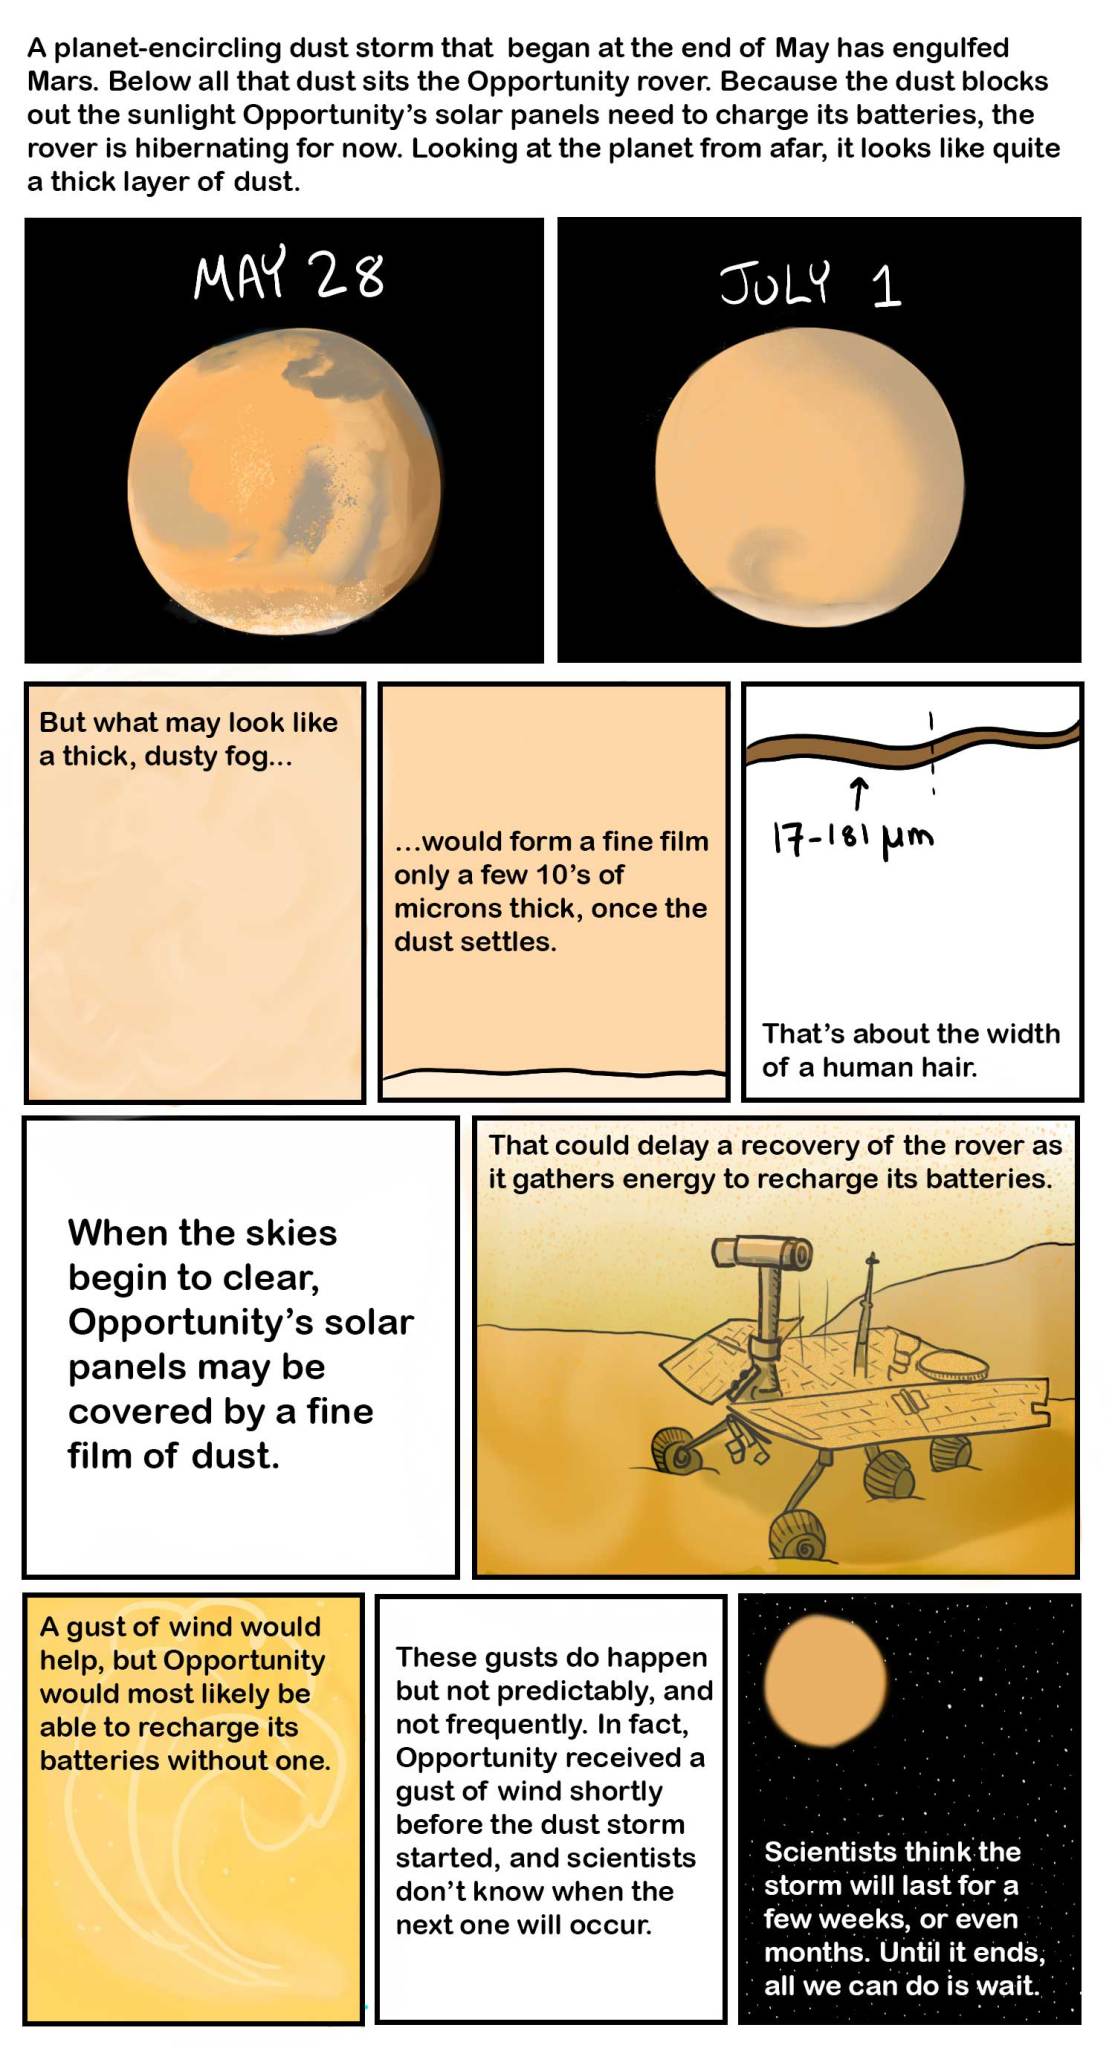 Mars comic showing particles in dust storm and rover